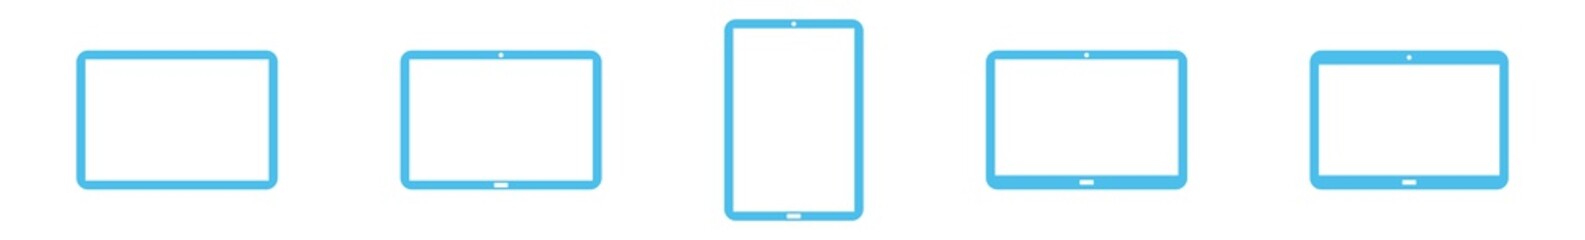 Tablet Computer Icon Blue | Tablet PC Illustration | Smartphone Mobile Phone Symbol | Display Logo | Touch Screen Sign | Isolated | Variations